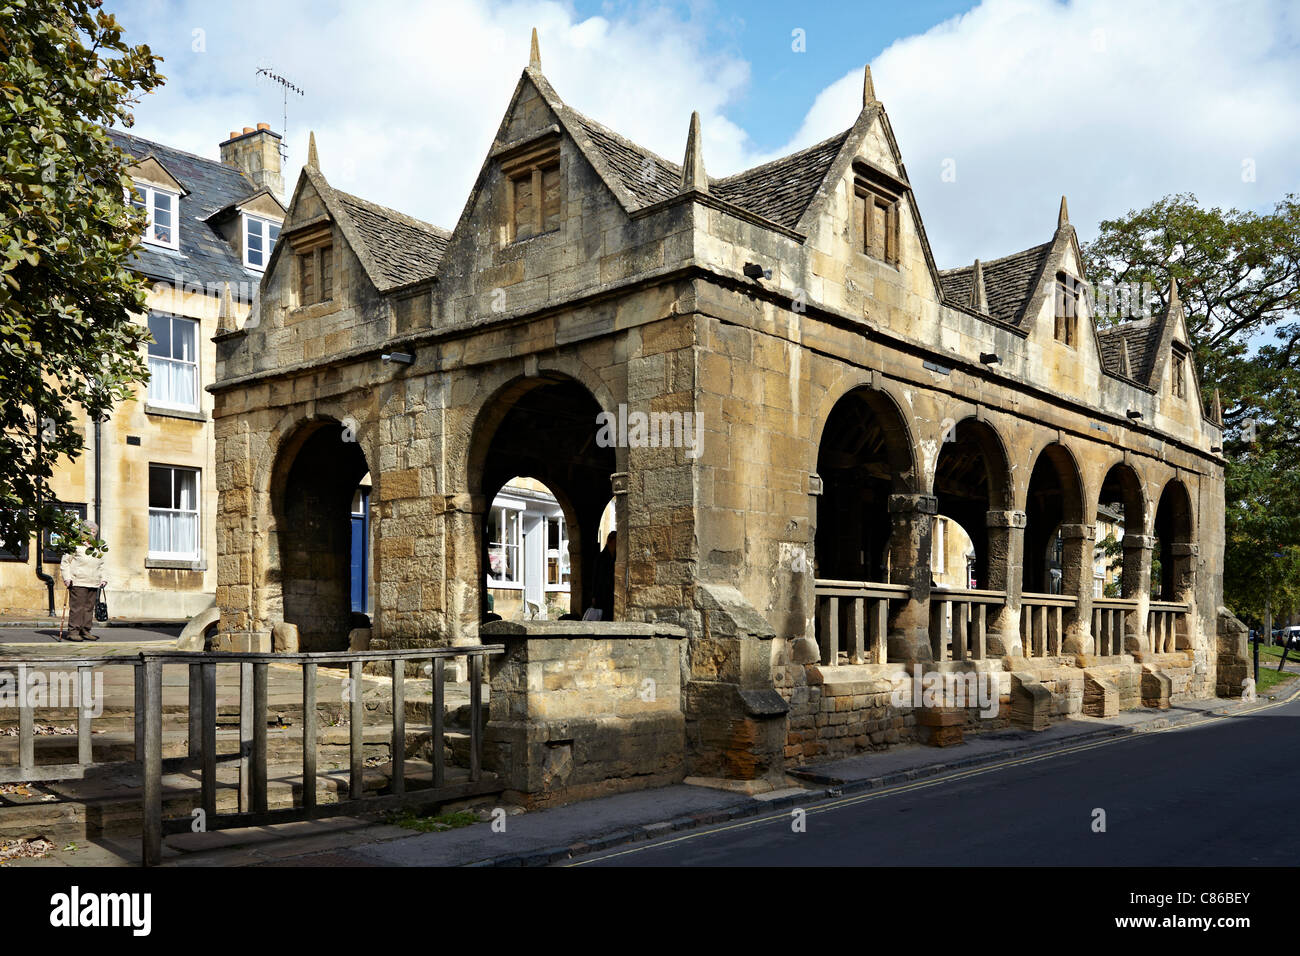 Chipping Campden Market Hall. The ancient market hall at Chipping Campden Cotswolds England dating back to 1627 Stock Photo